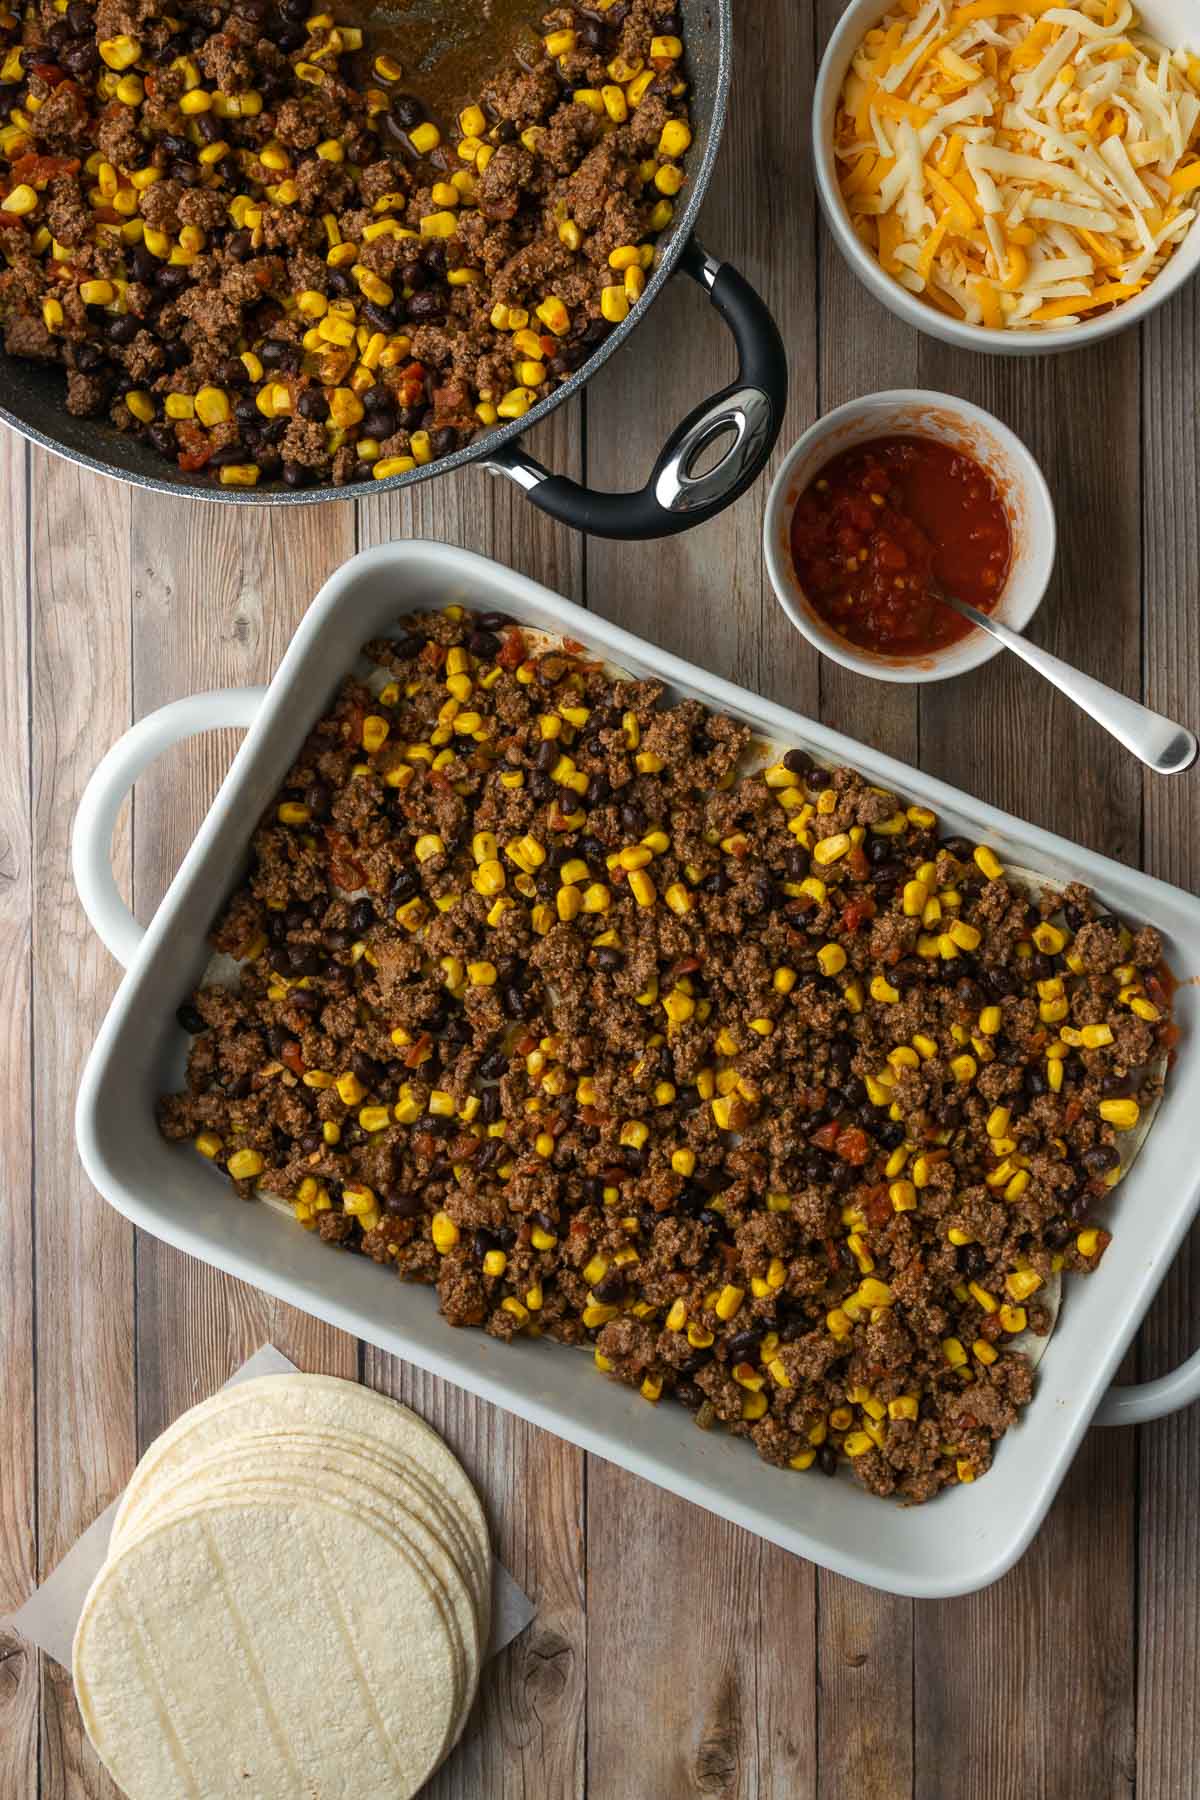 Casserole dish filled with salsa, corn tortillas, and ground beef mixture